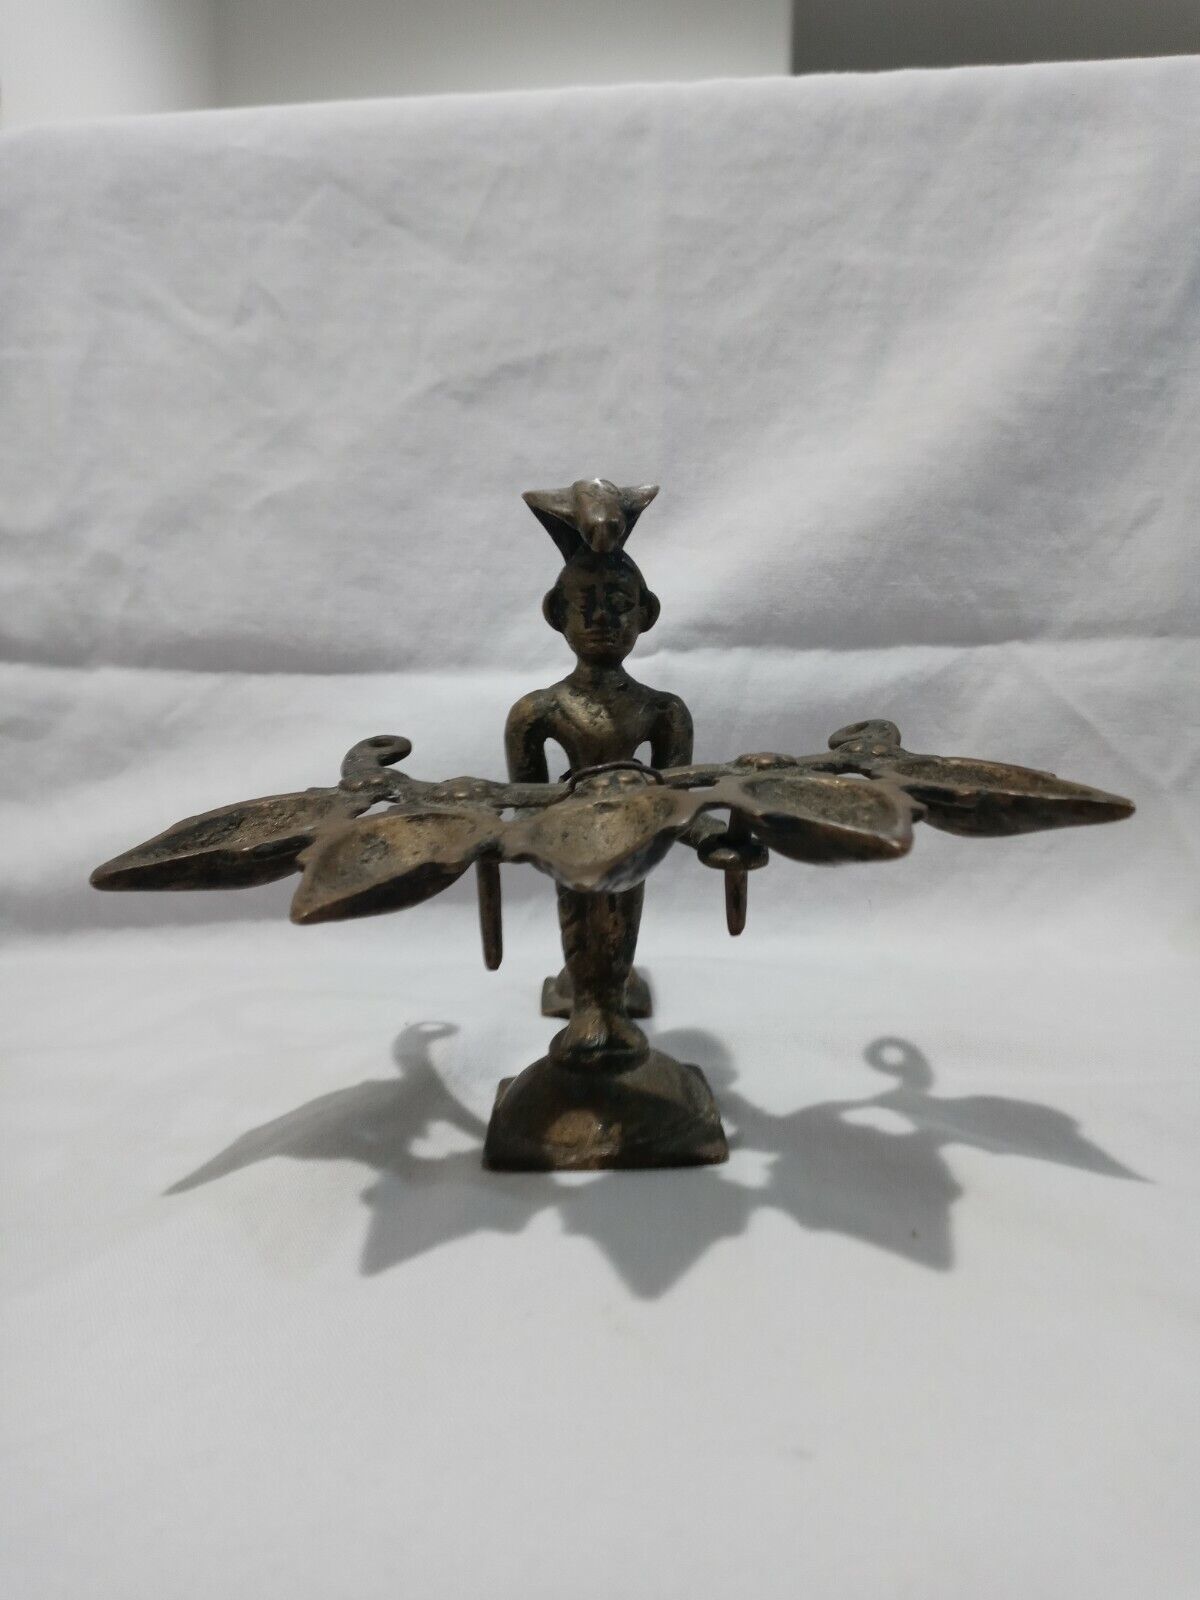 Rare Antique Egyptian Tattoo Ink Stand 13.5 grams 4.5 - 5 inches in Height